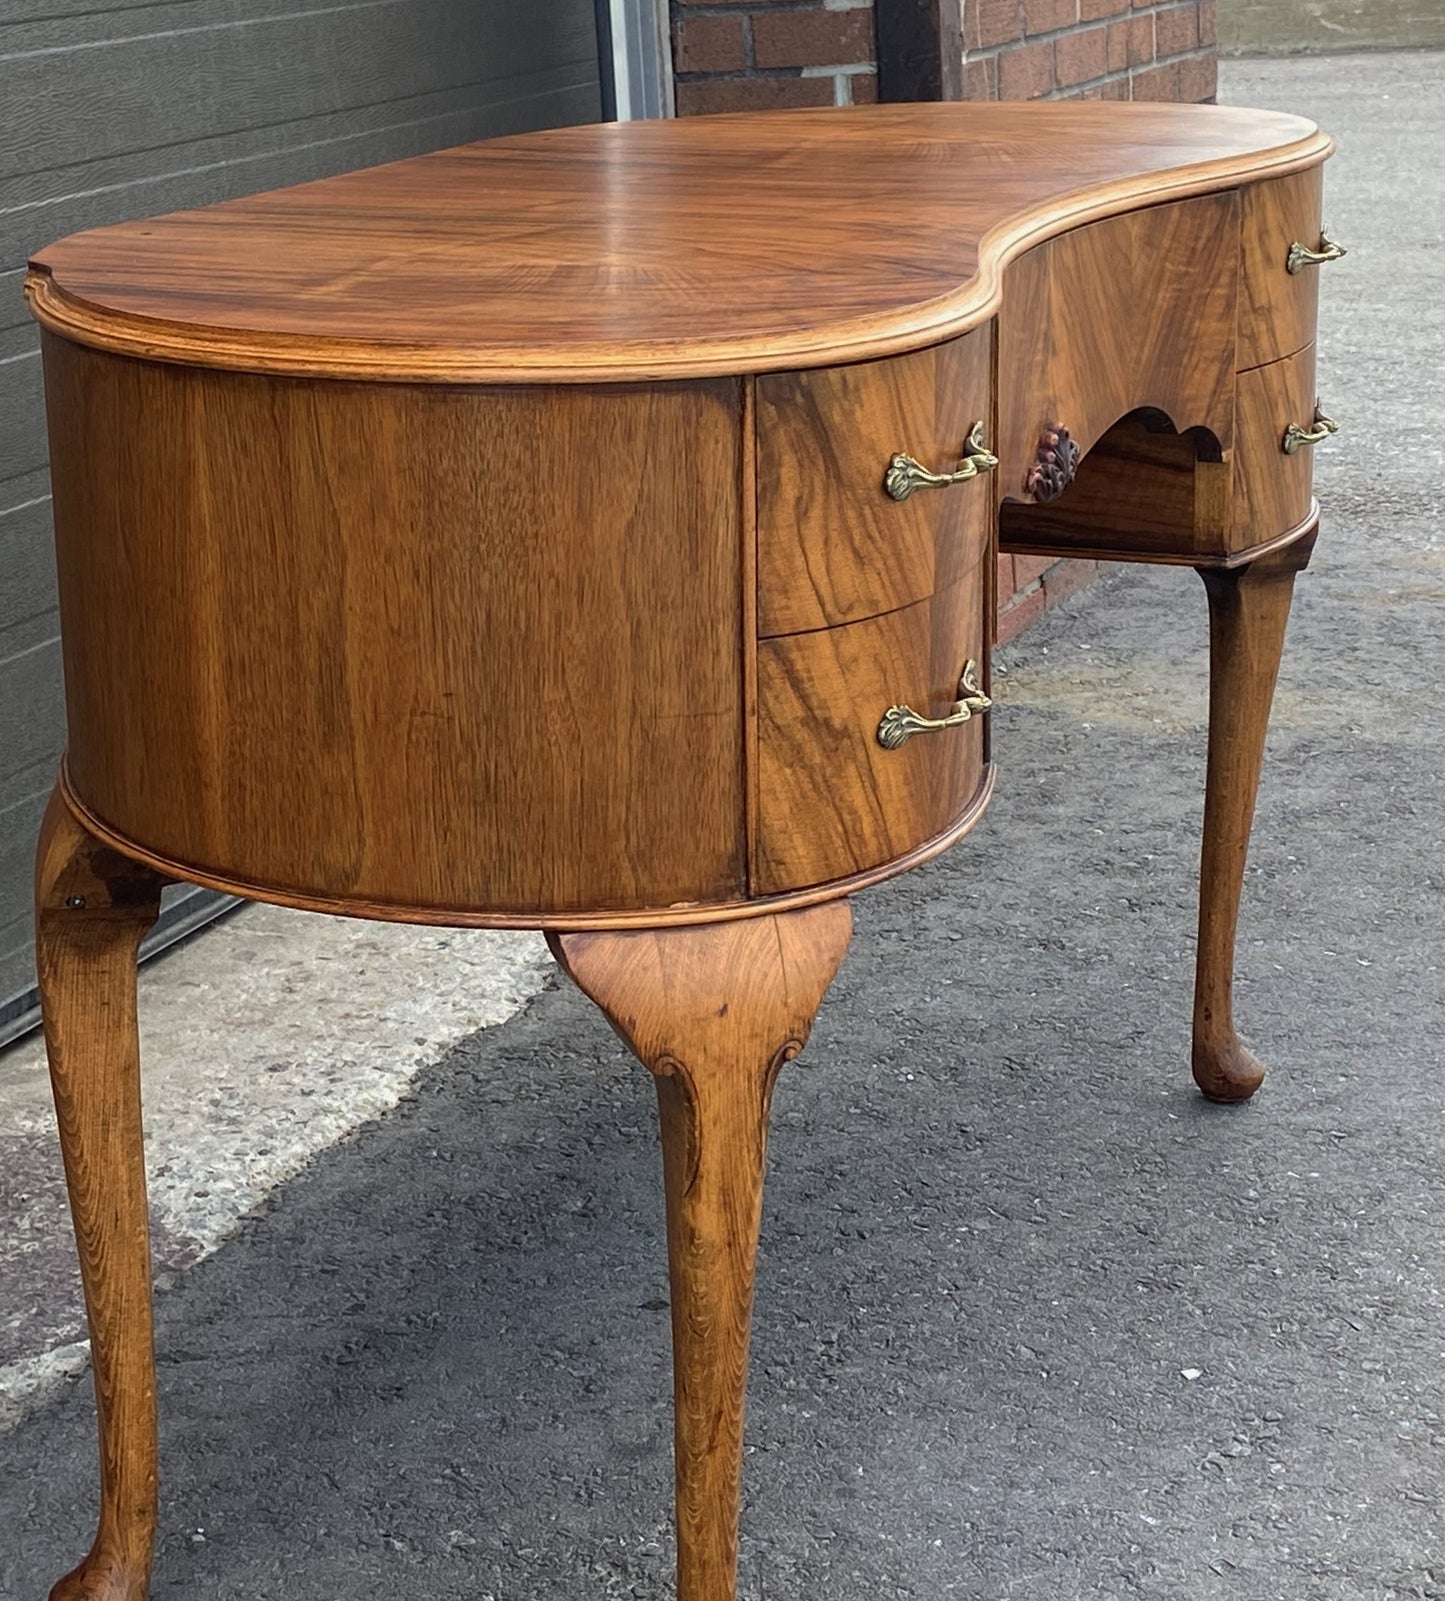 REFINISHED Antique Walnut Vanity or Desk Perfect, Compact